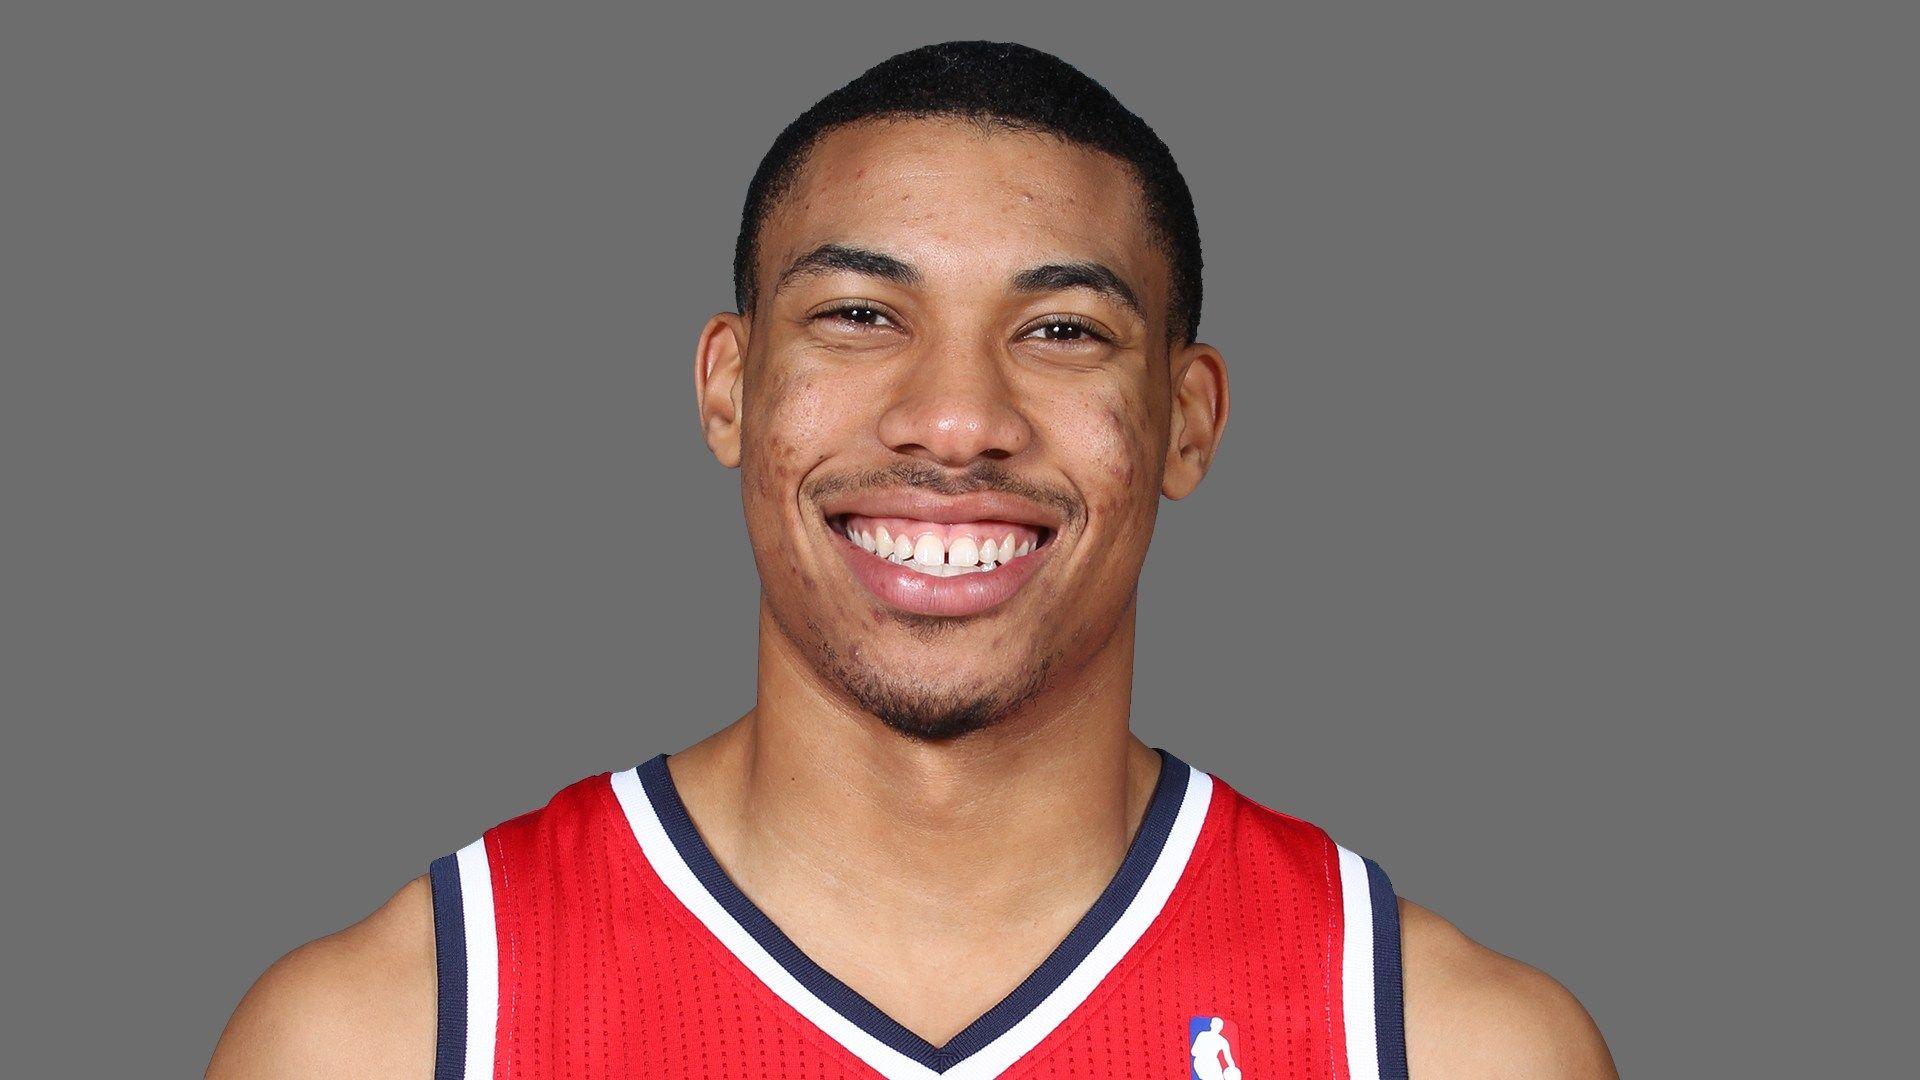 Sheridan Hoops Rookie Rankings There's Been an Otto Porter Sighting.